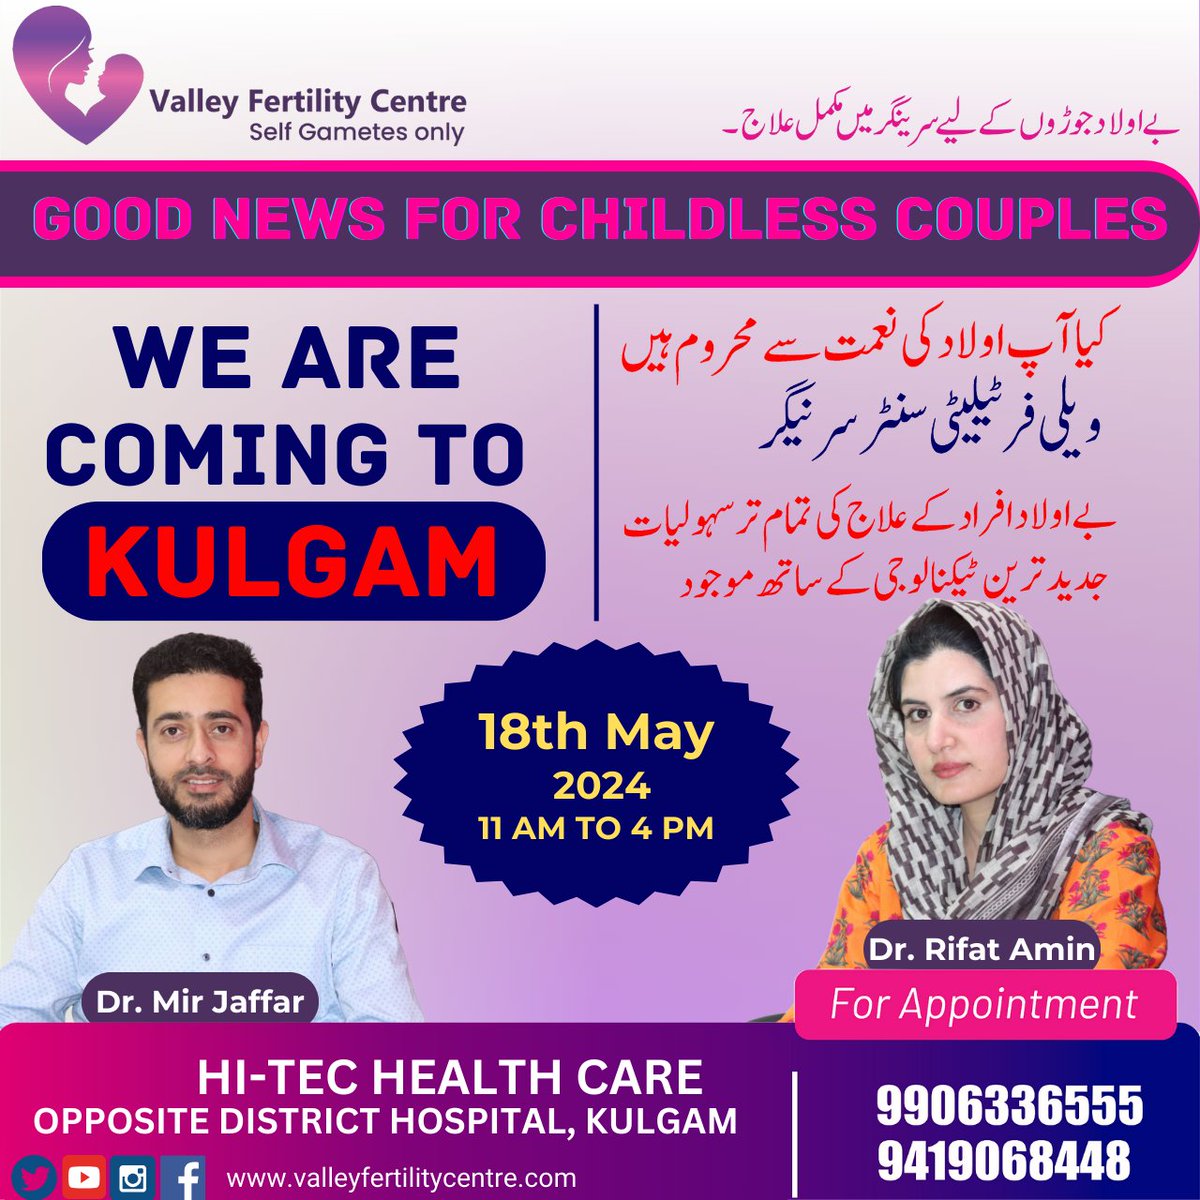 Valley's best IVF specialists coming to Kulgam on 5th of May. #IVF #infertility #Kashmir #gynaecology #IVFtreatment #southkashmir @SouthKashmir